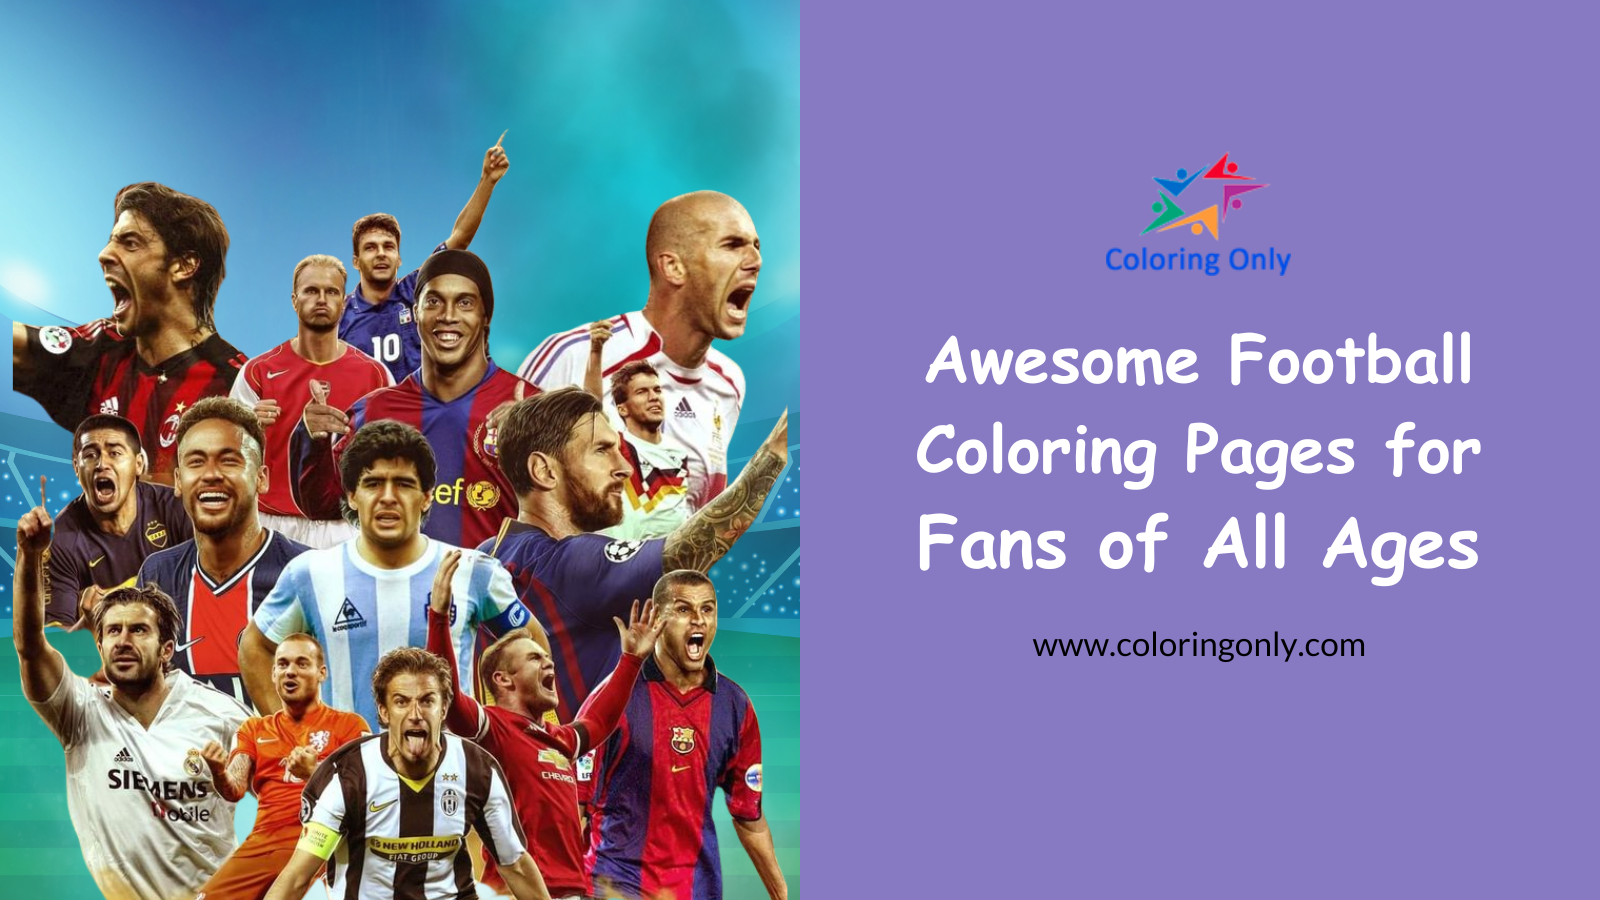 Awesome Football Coloring Pages for Fans of All Ages